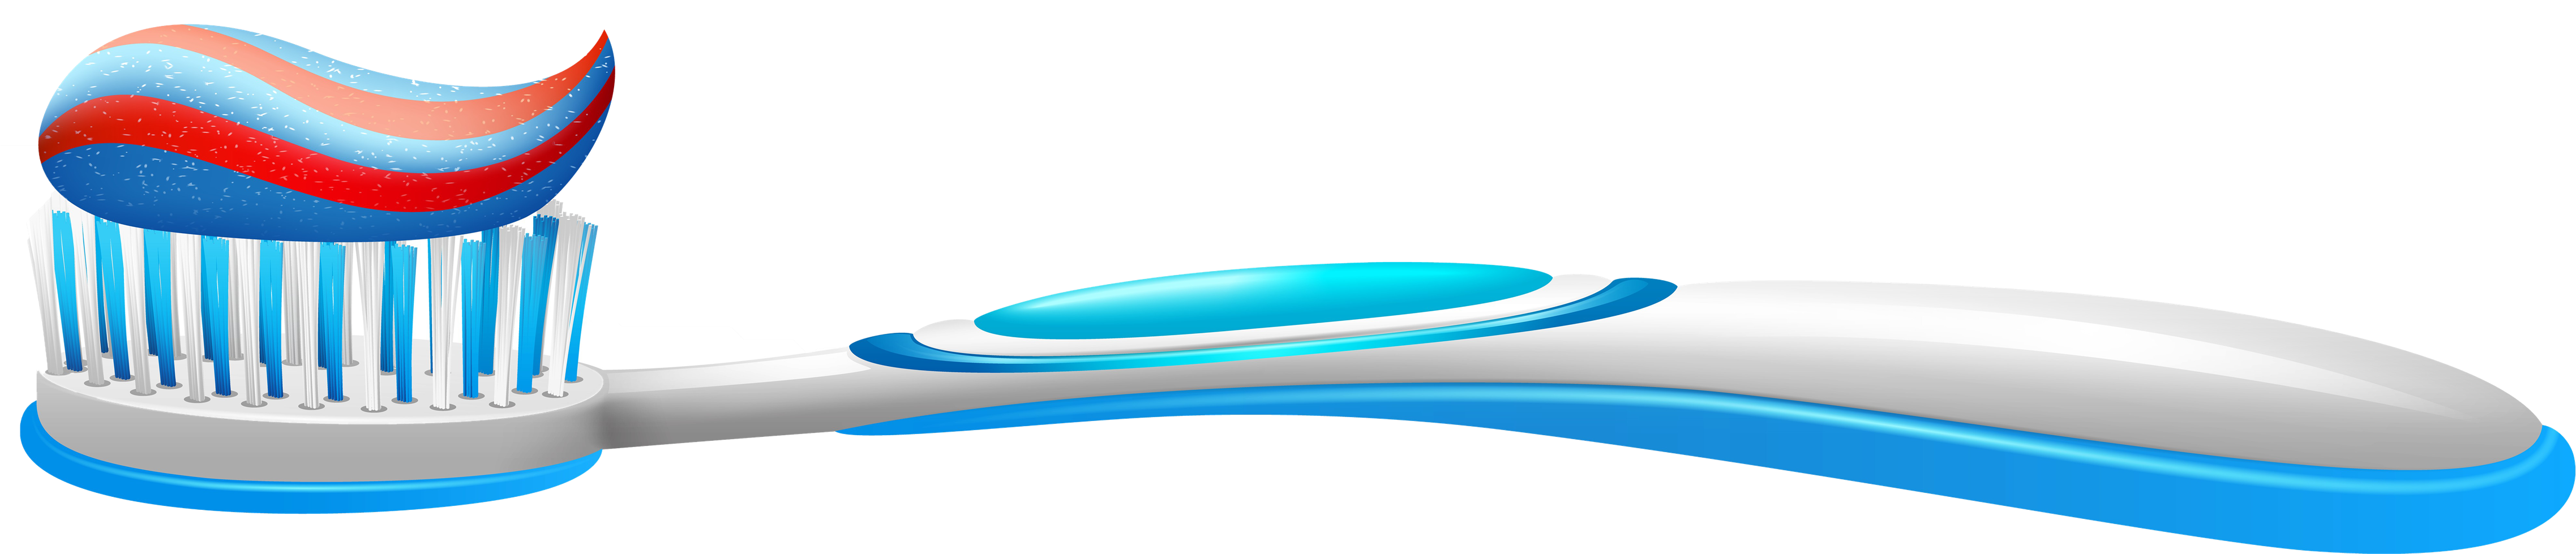 Toothbrushwith Toothpaste Illustration PNG